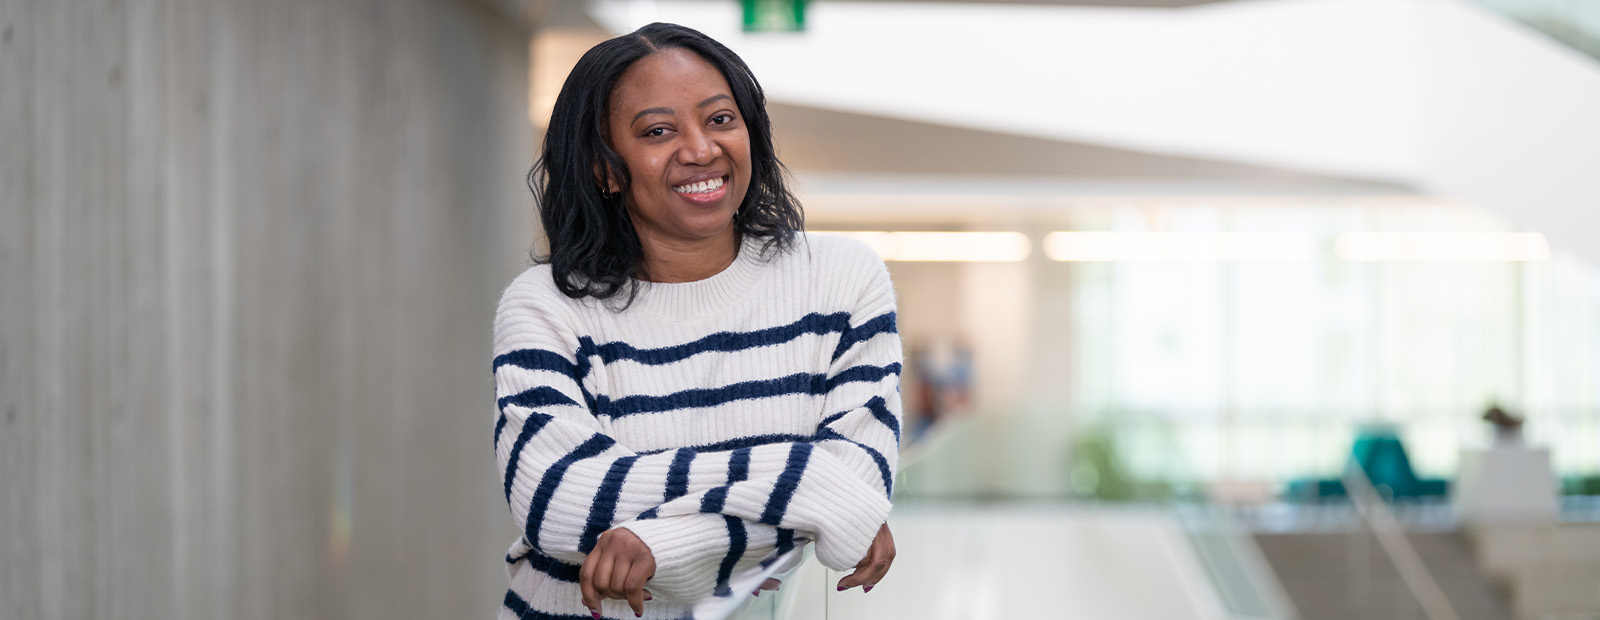 Tracy Thomas wears a white sweater with thin black horizontal stripes. She leans against a glass railing in Allard Hall, smiling.